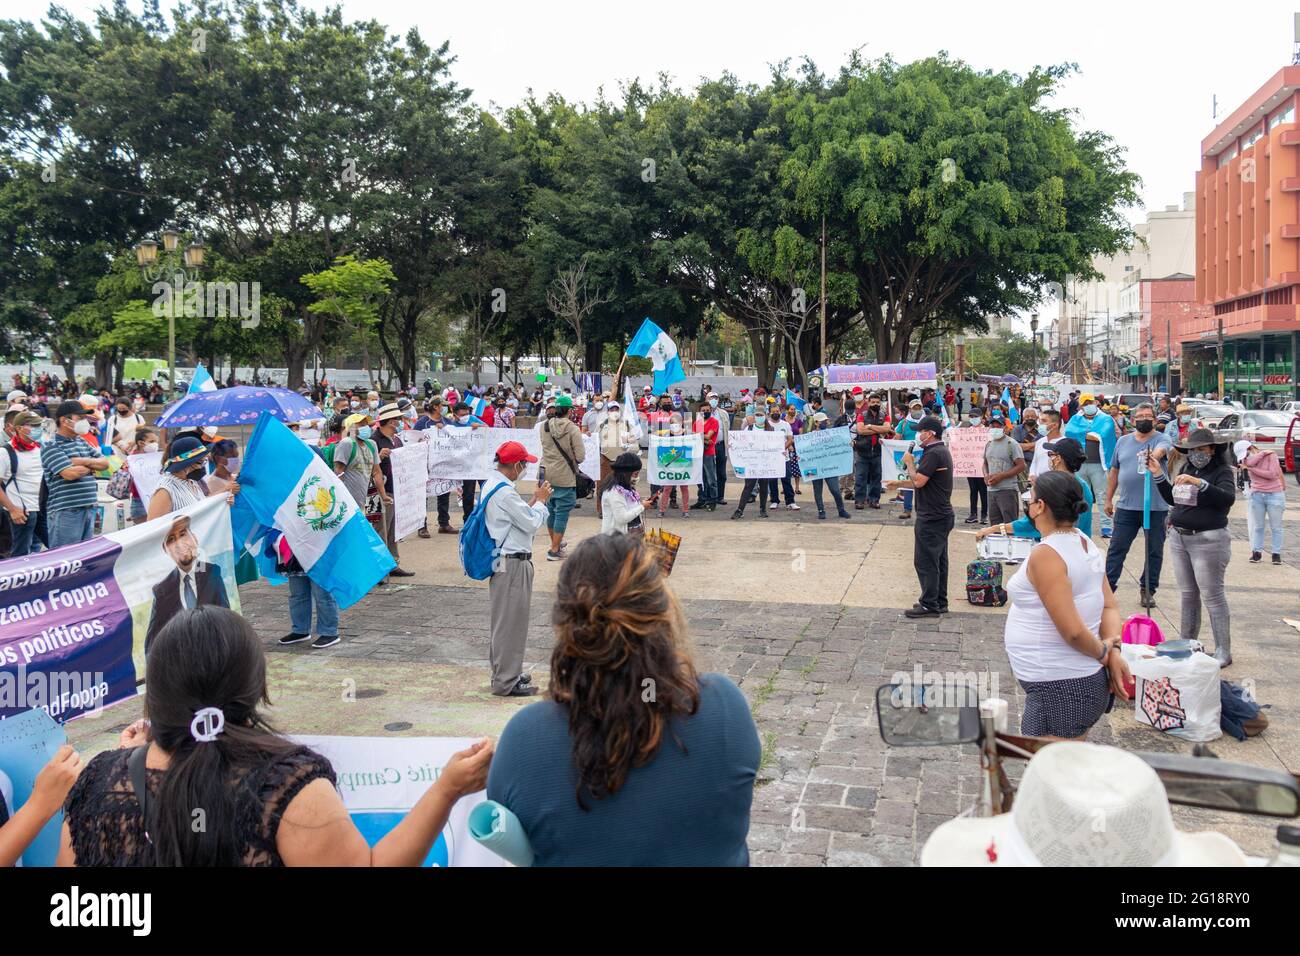 Protest against guatemala government corruption and the persecution of civil society leaders. Days before visit of vice president of US Kamala Harris Stock Photo